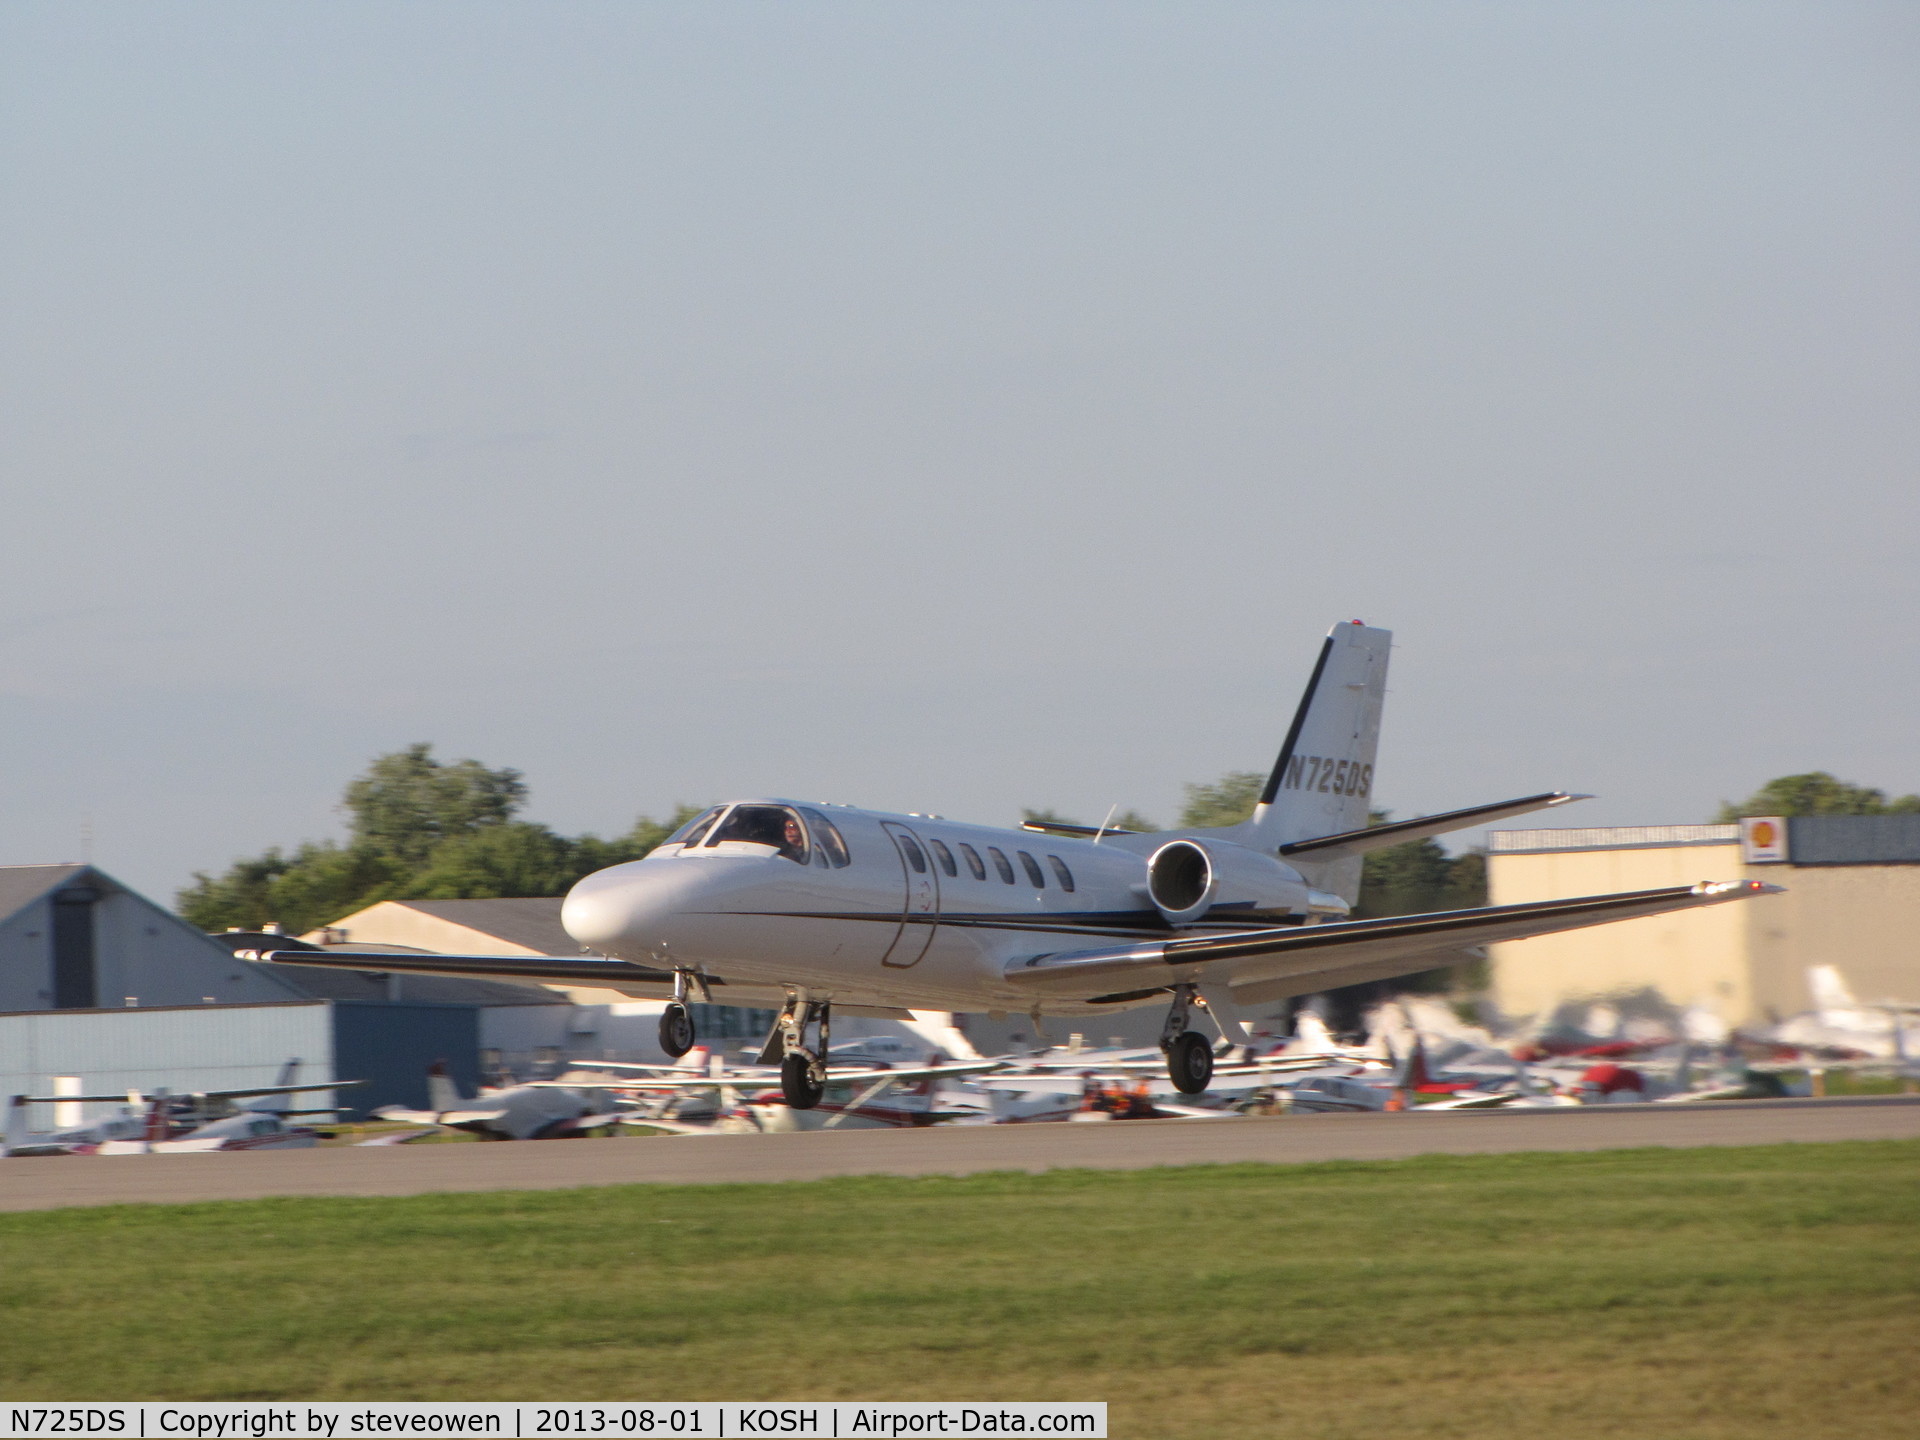 N725DS, 1997 Cessna 550 C/N 550-0822, Wheels off the ground and heading out of Oshkosh